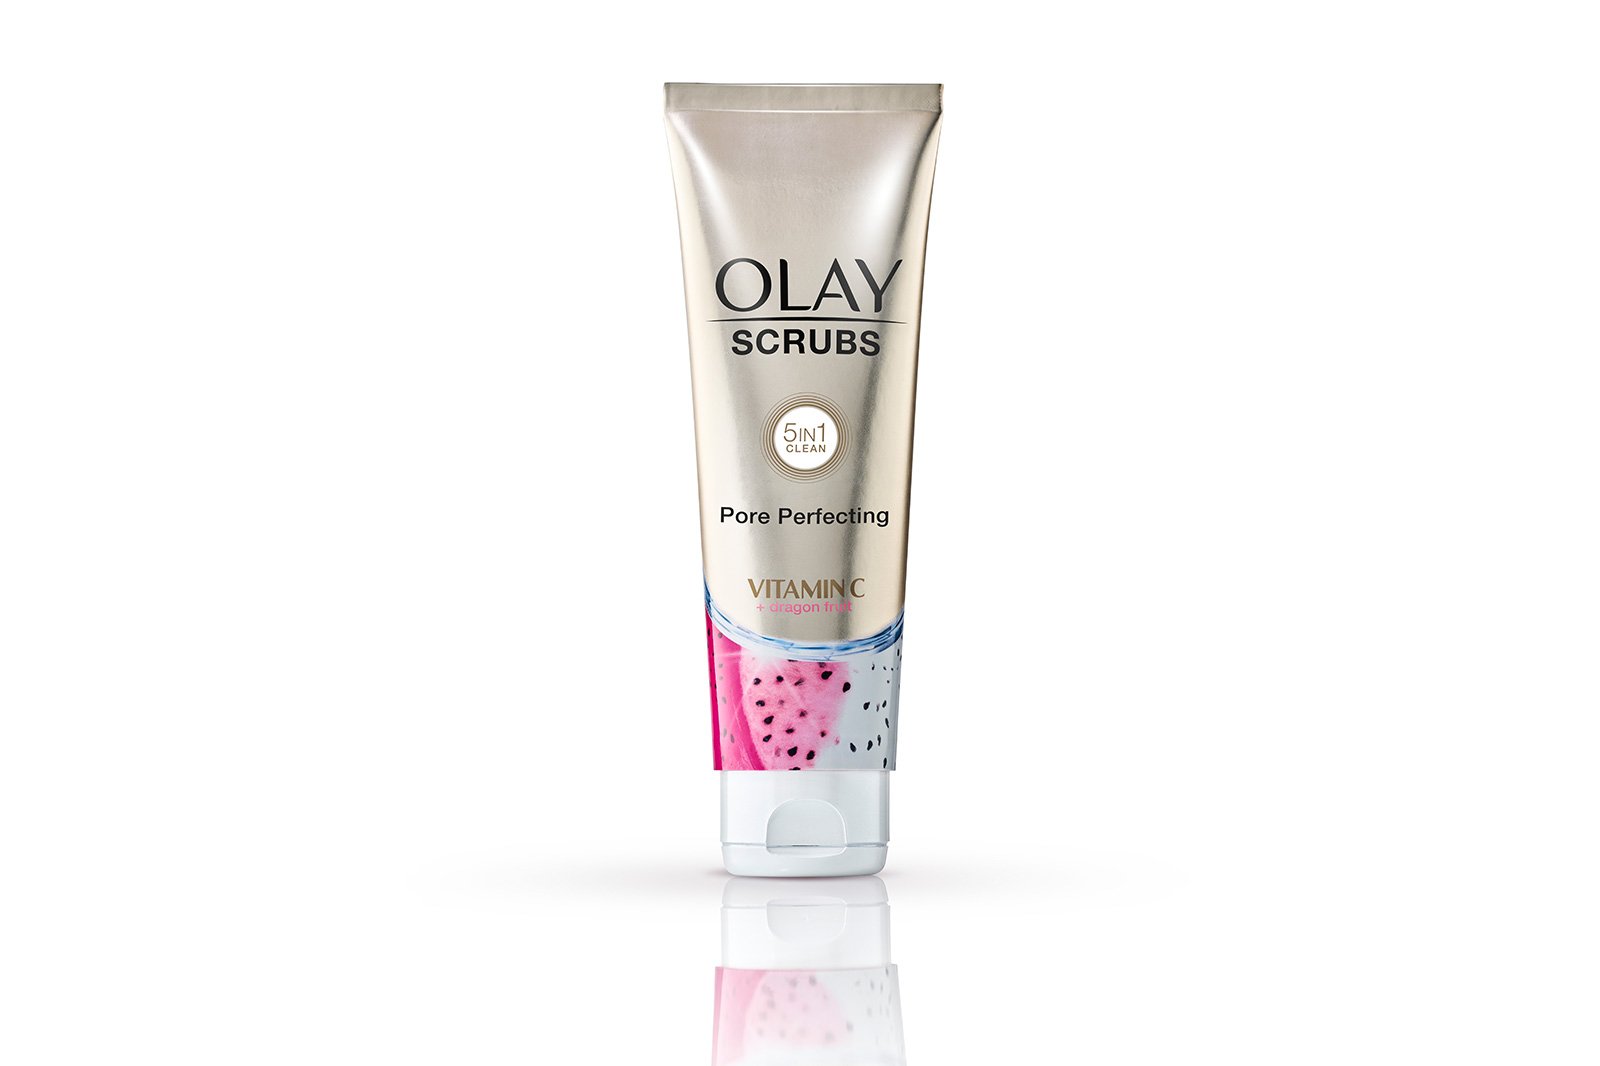 Olay Scrubs after photo retouching